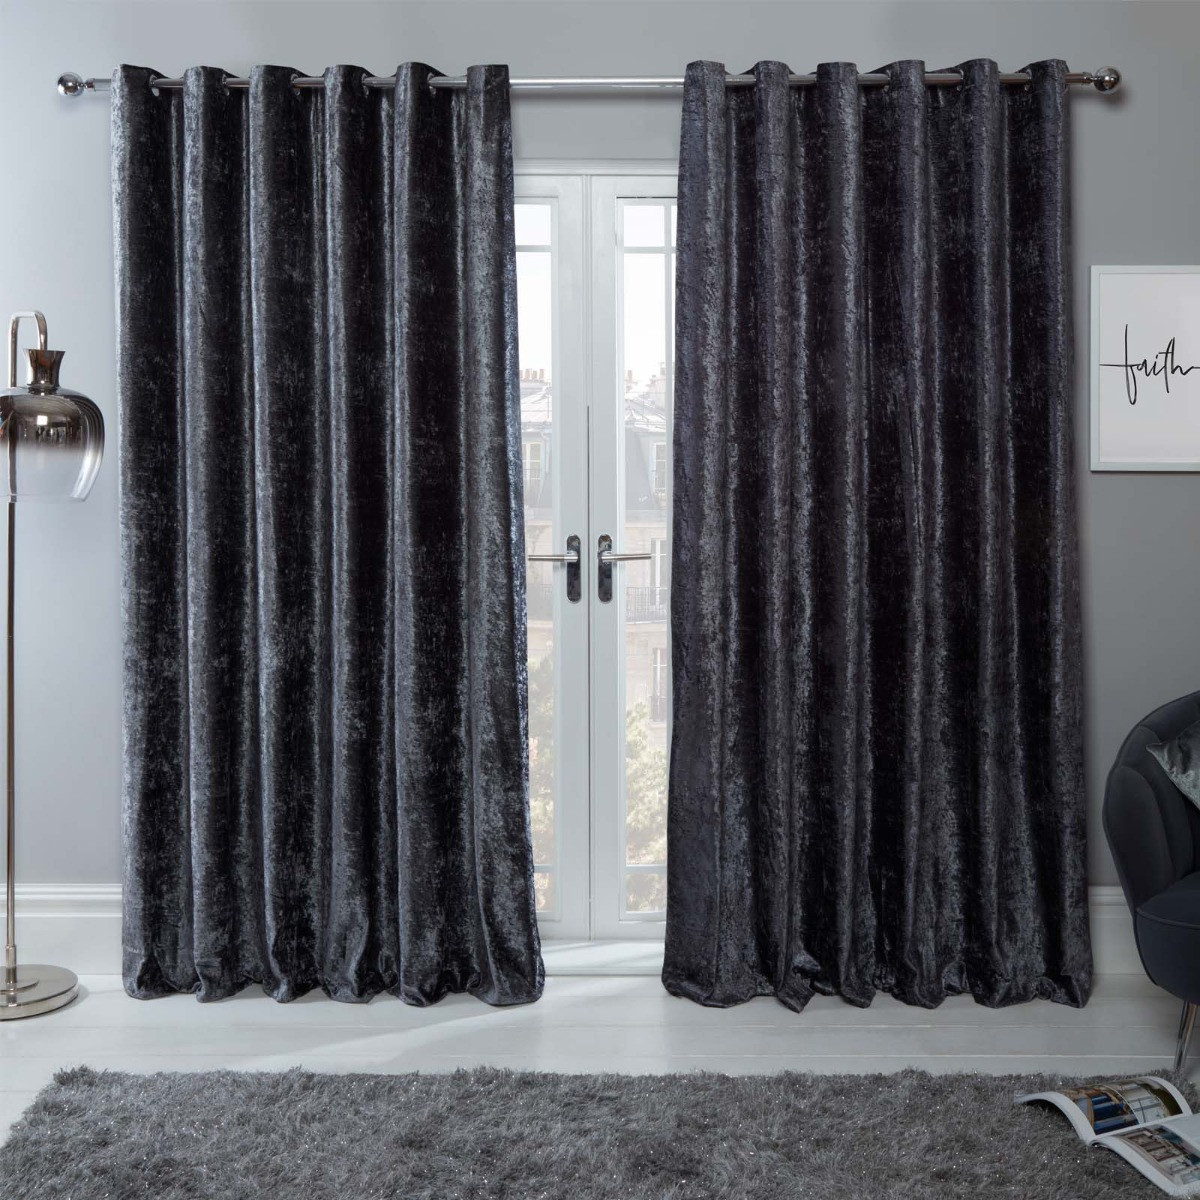 Sienna Home Crushed Velvet Eyelet Curtains - Charcoal Grey 46" x 54">